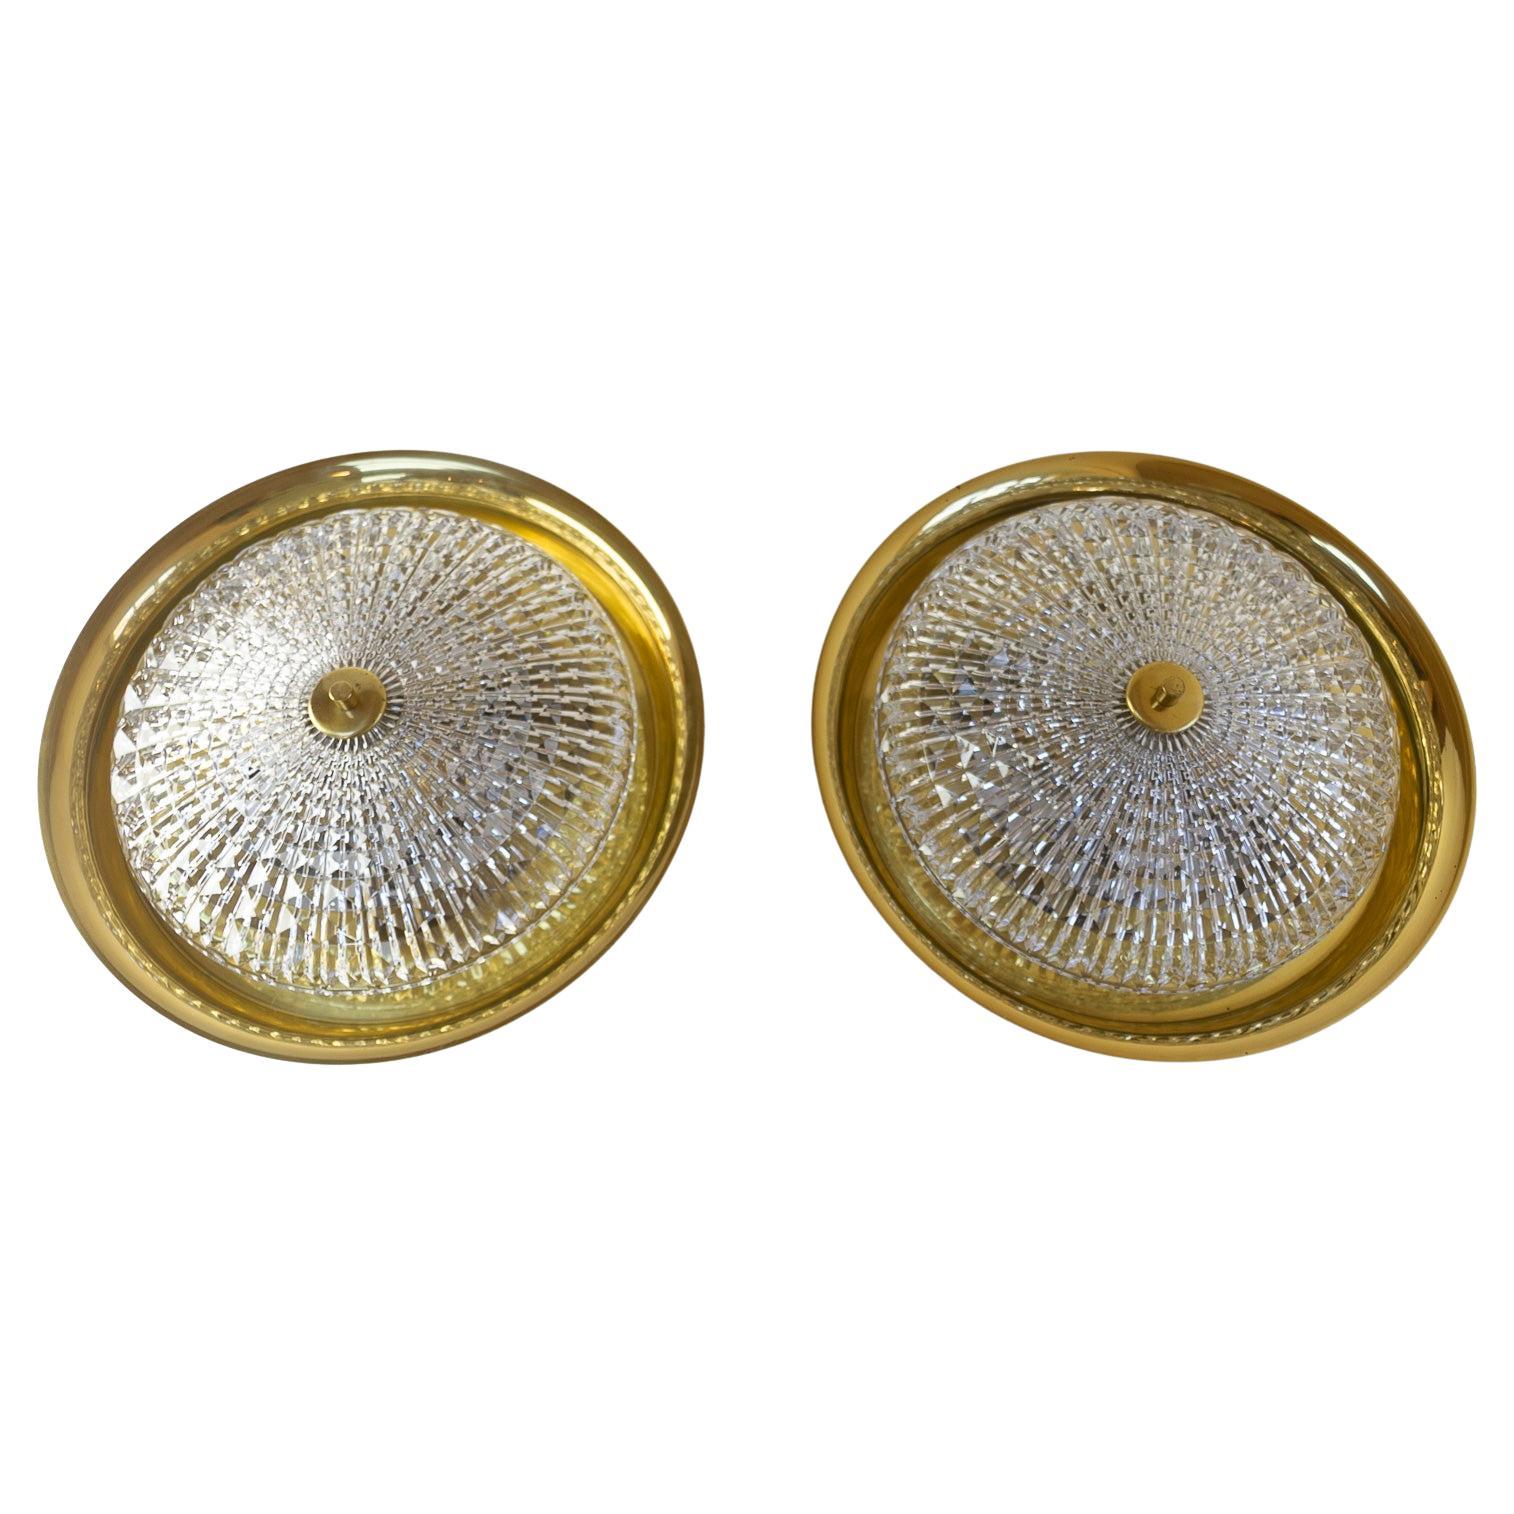 Orrefors Brass Wall or Ceiling Lamps by Fagerlund for Lyfa, 1960s. Set of 2. For Sale